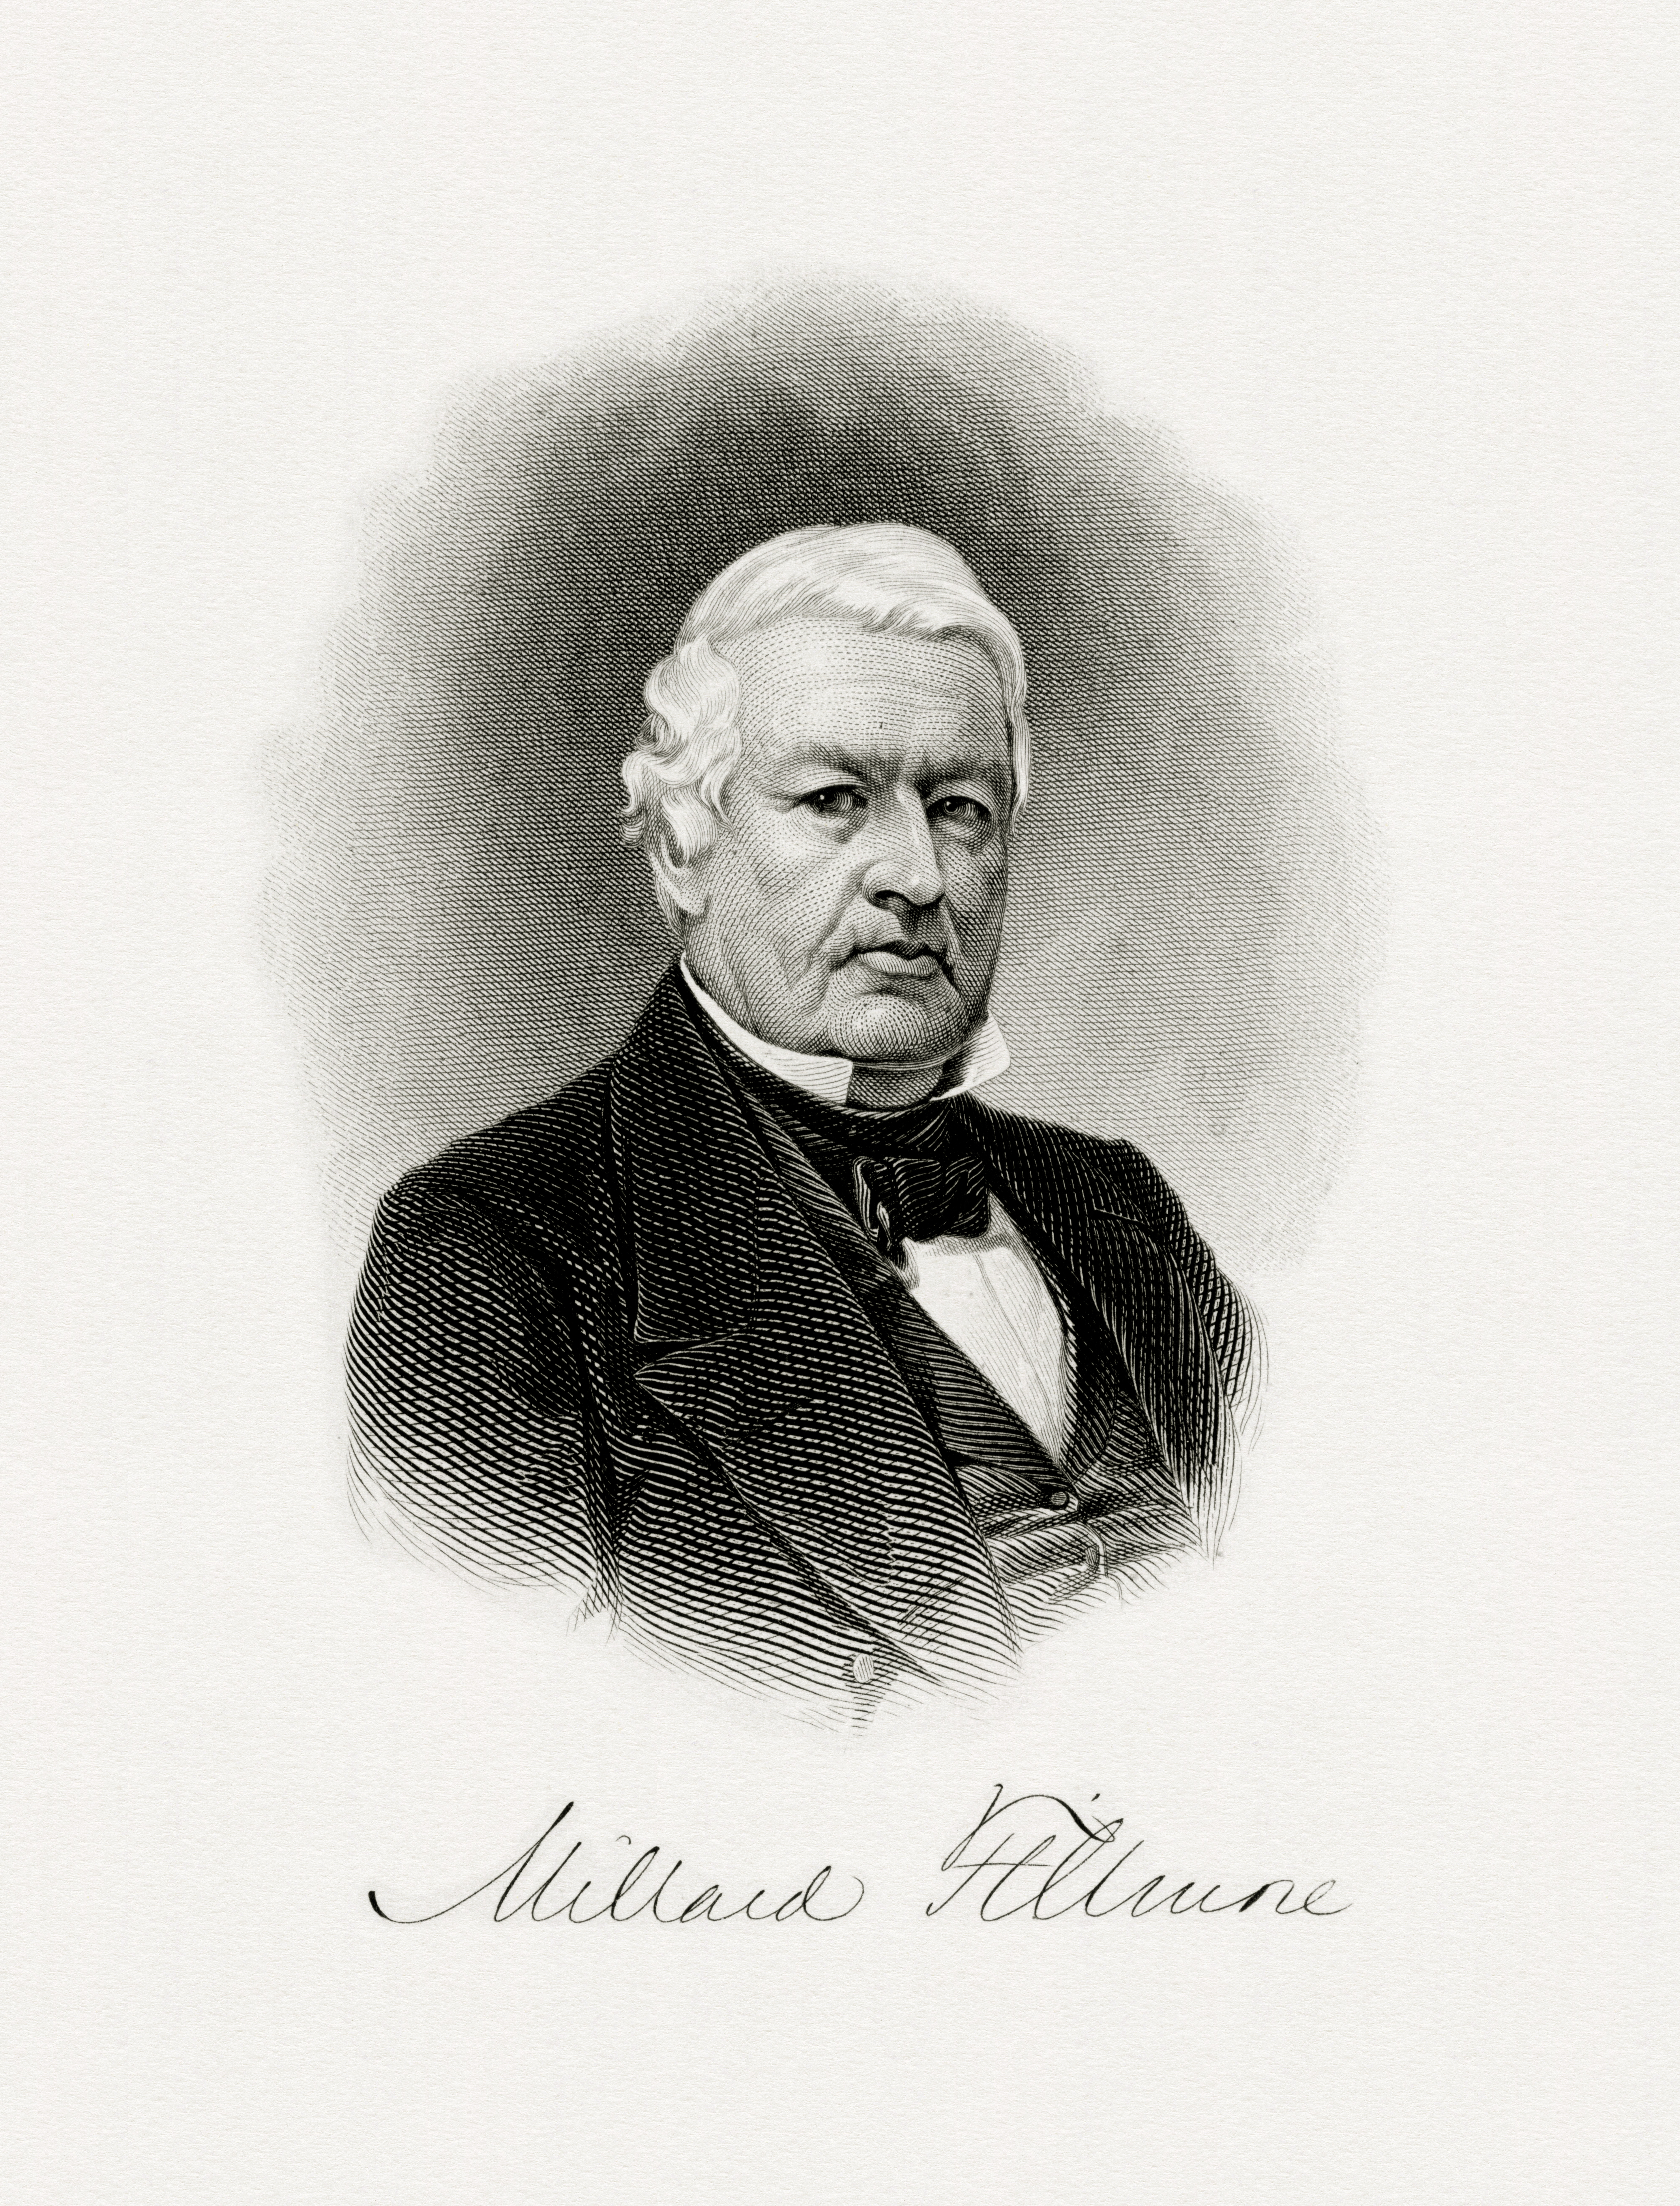 Engraved portrait of U.S. President Millard Fillmore by the Bureau of Engraving and Printing.